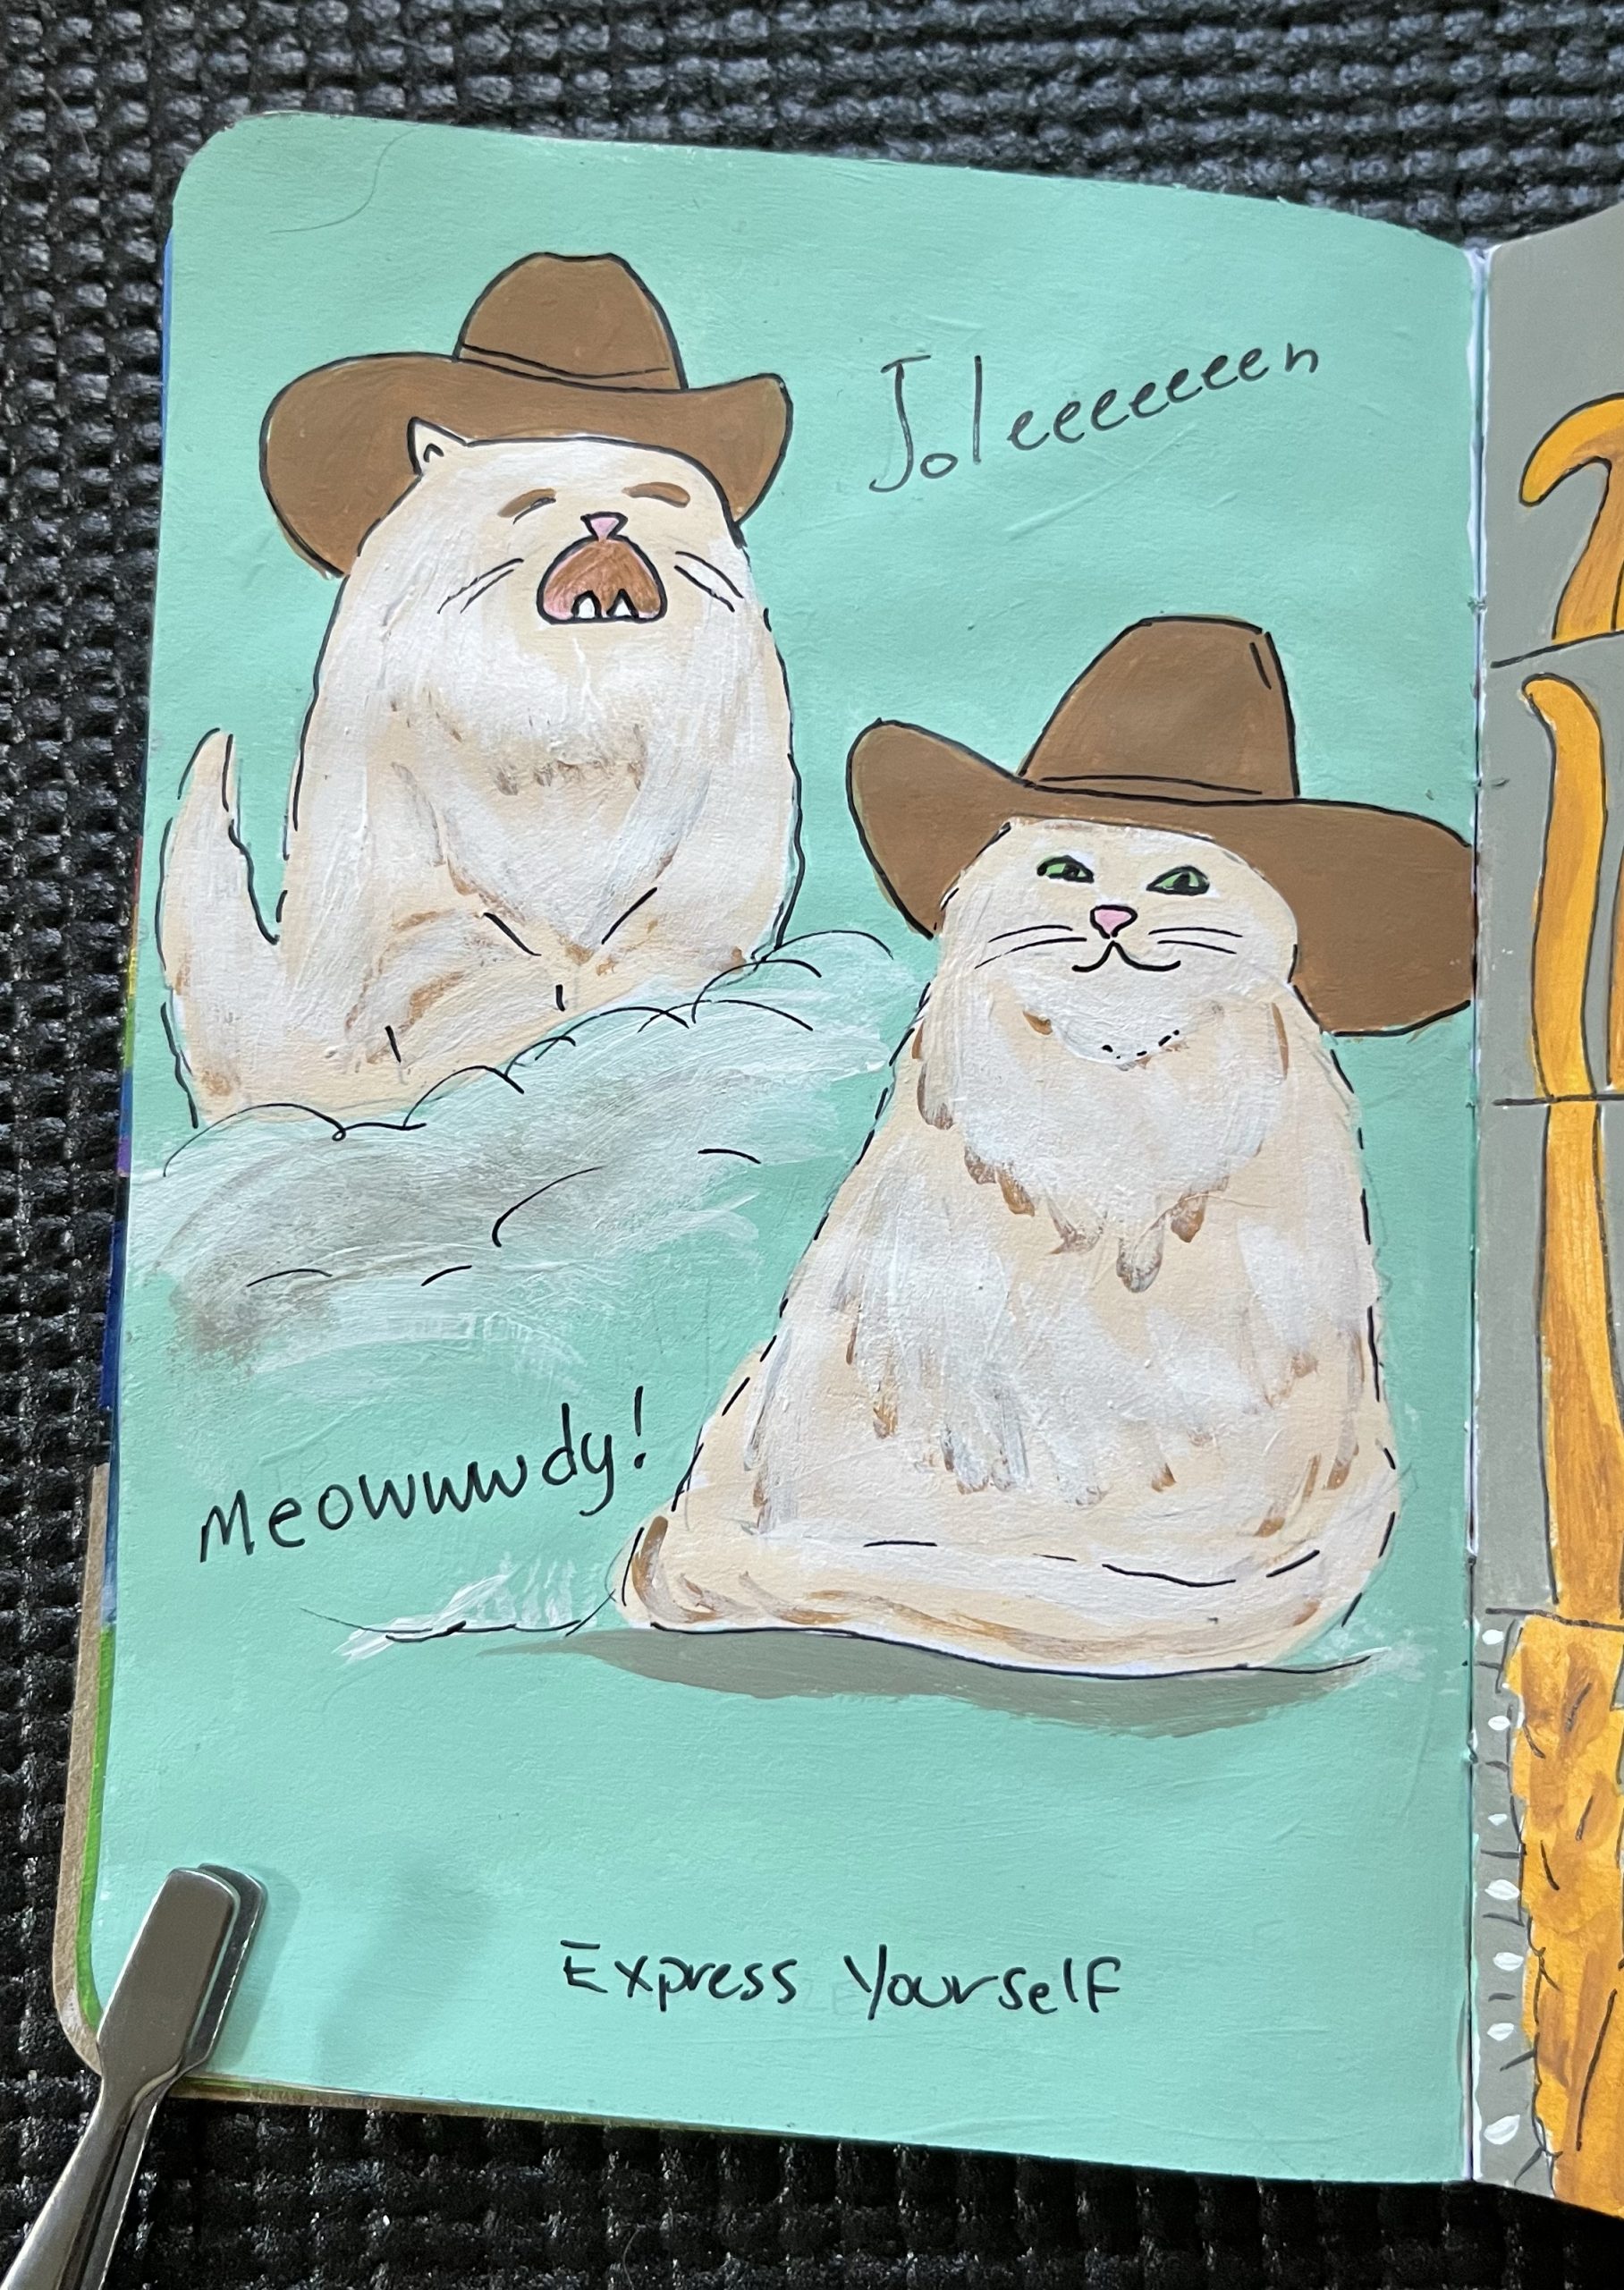 A painted page showing two cats, one is singing, the other friendly. Both are fluffy cream colored with cowboy hats.